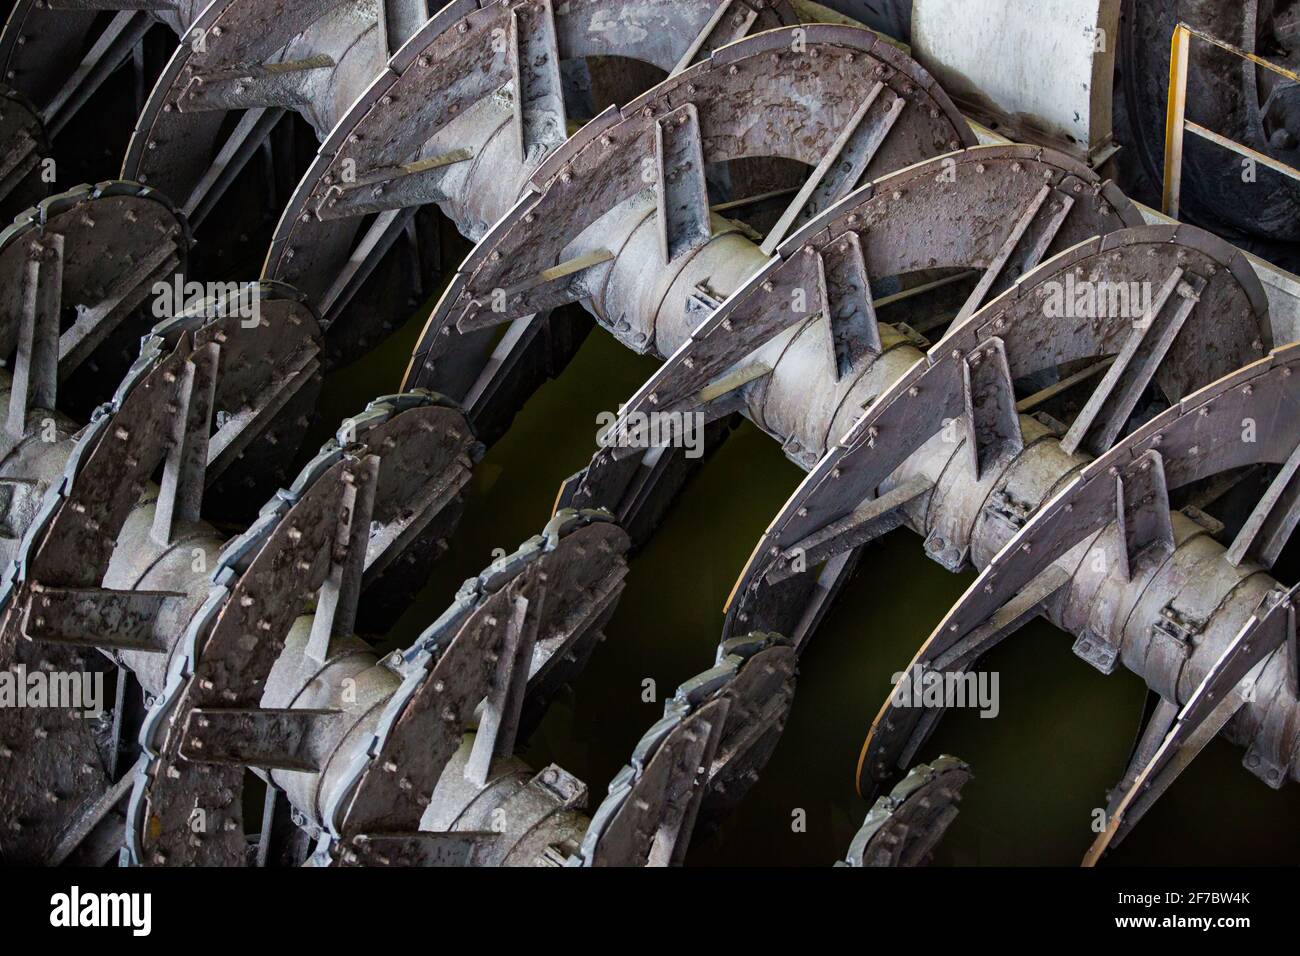 Screw conveyor close-up. Ore concentration plant. Focus on upper spiral. Stock Photo